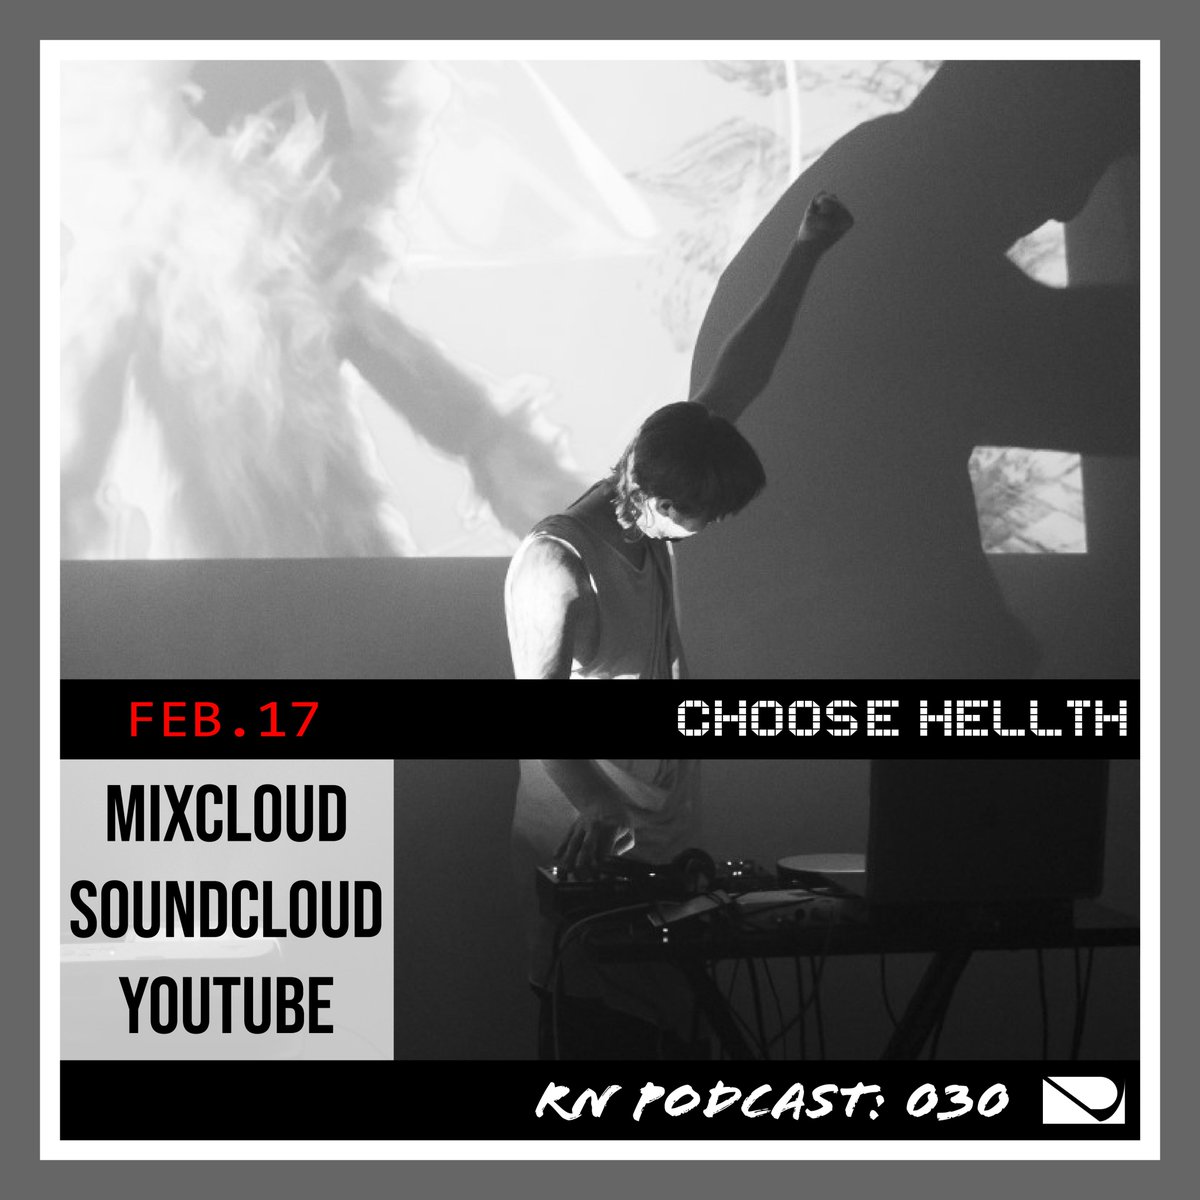 Excited to announce our RN Podcast 030, coming soon, with Choose Hellth / @GL33kler 

Friday, Feb. 17th, 2023. Tune into our Soundcloud, YouTube and Mixcloud channels!

➕

Era of My Ways EP!

Link in bio for more details.

#techno #leftfieldtechno #psychedelictechno